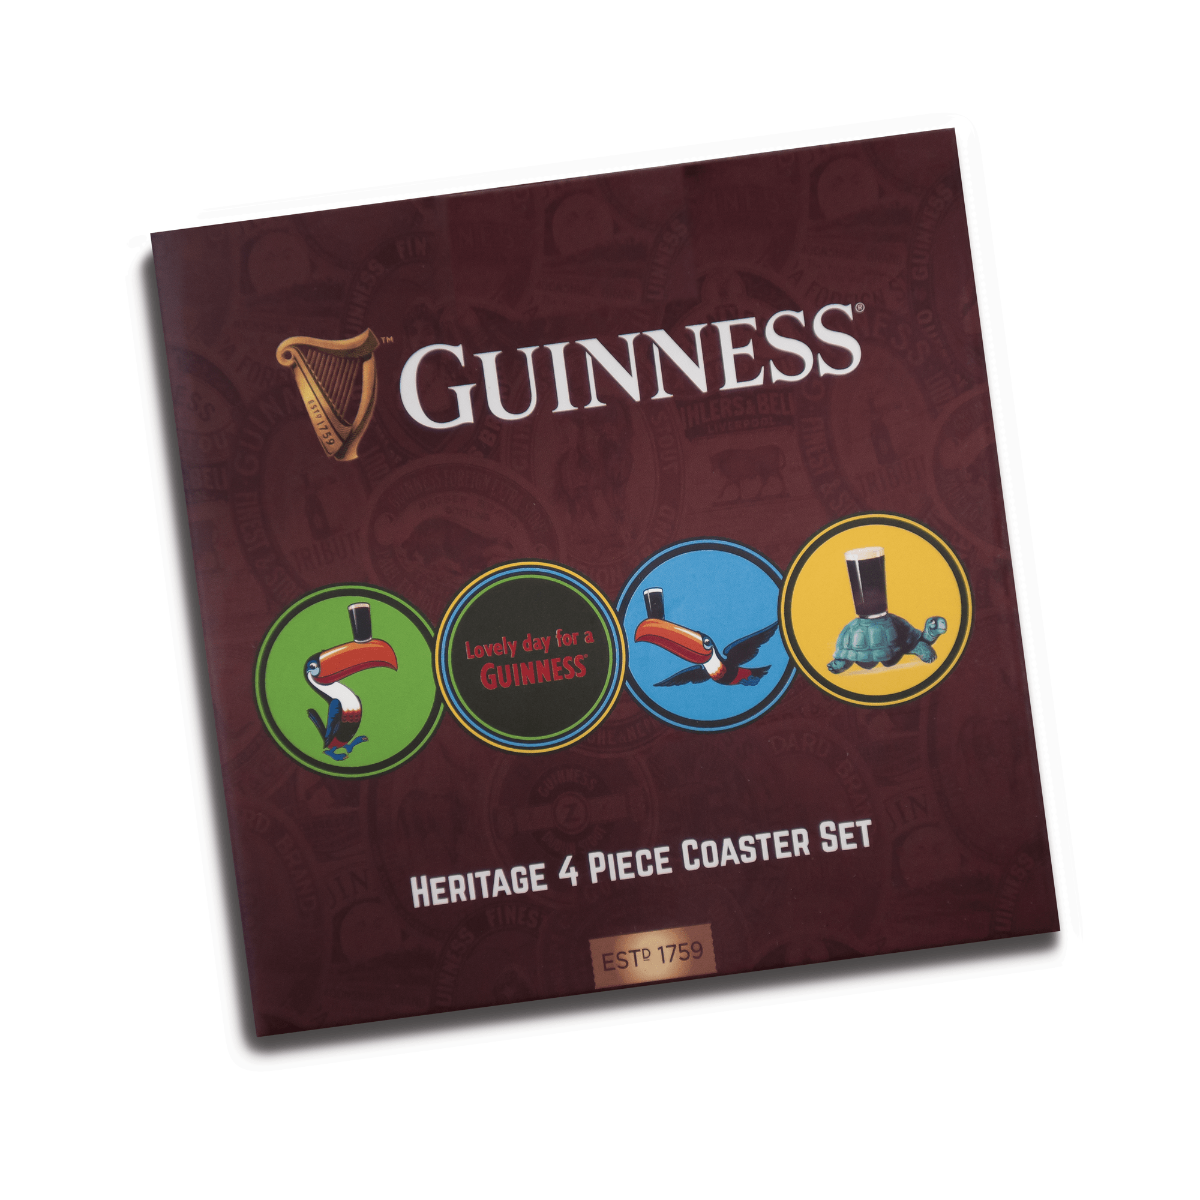 Guinness Ultimate Toucan Home Bar Pack, perfect as a bar gift or for any Guinness merchandise enthusiast.